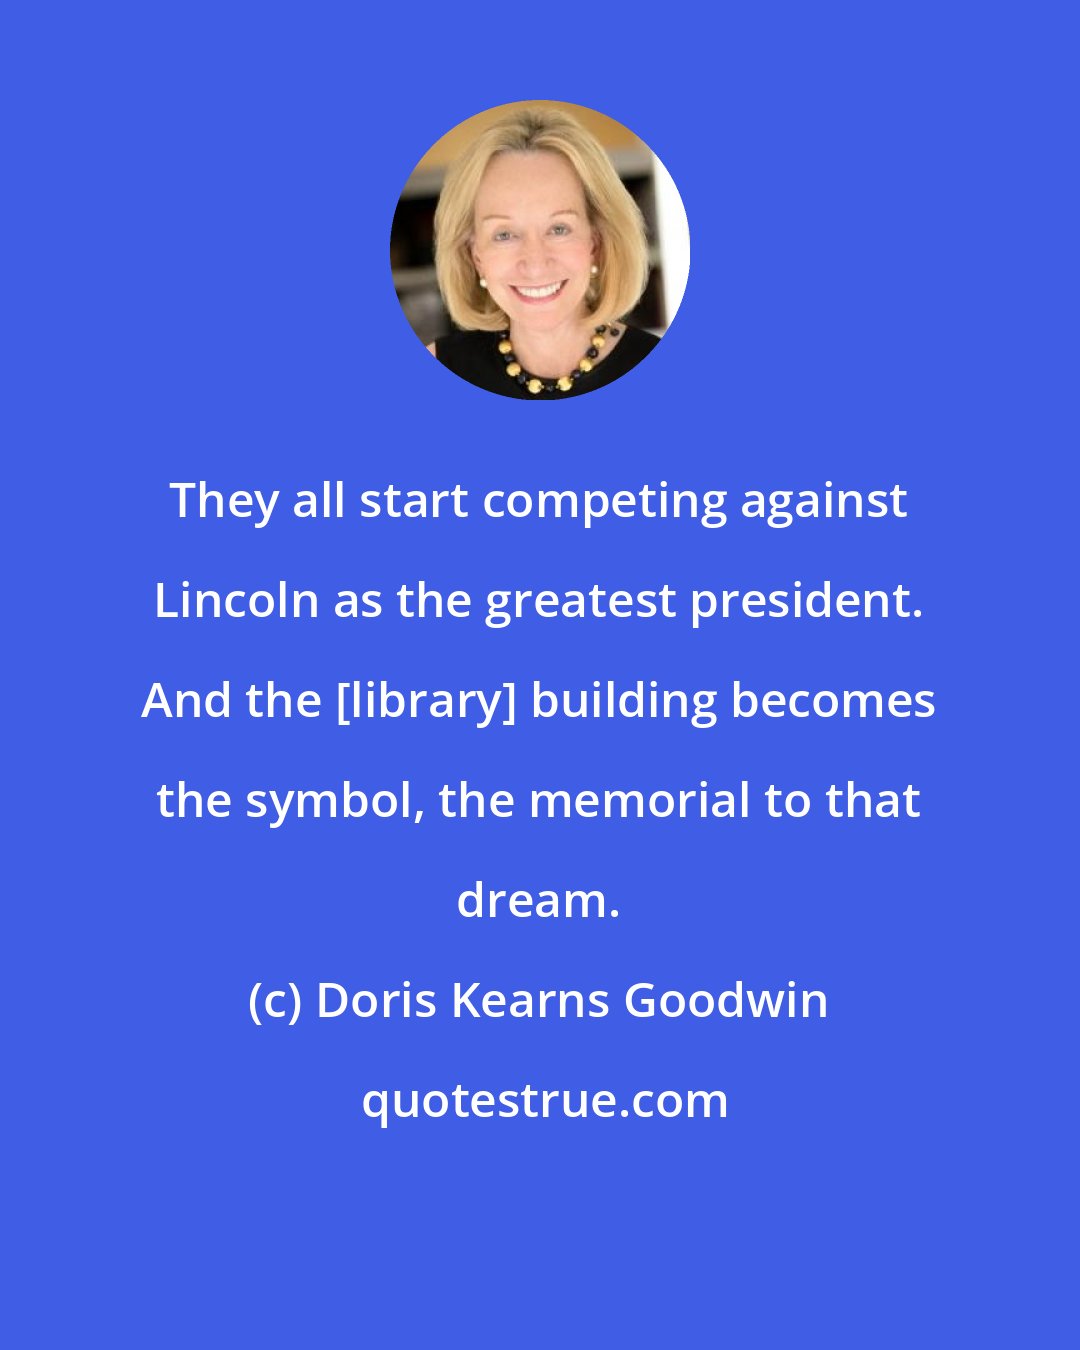 Doris Kearns Goodwin: They all start competing against Lincoln as the greatest president. And the [library] building becomes the symbol, the memorial to that dream.